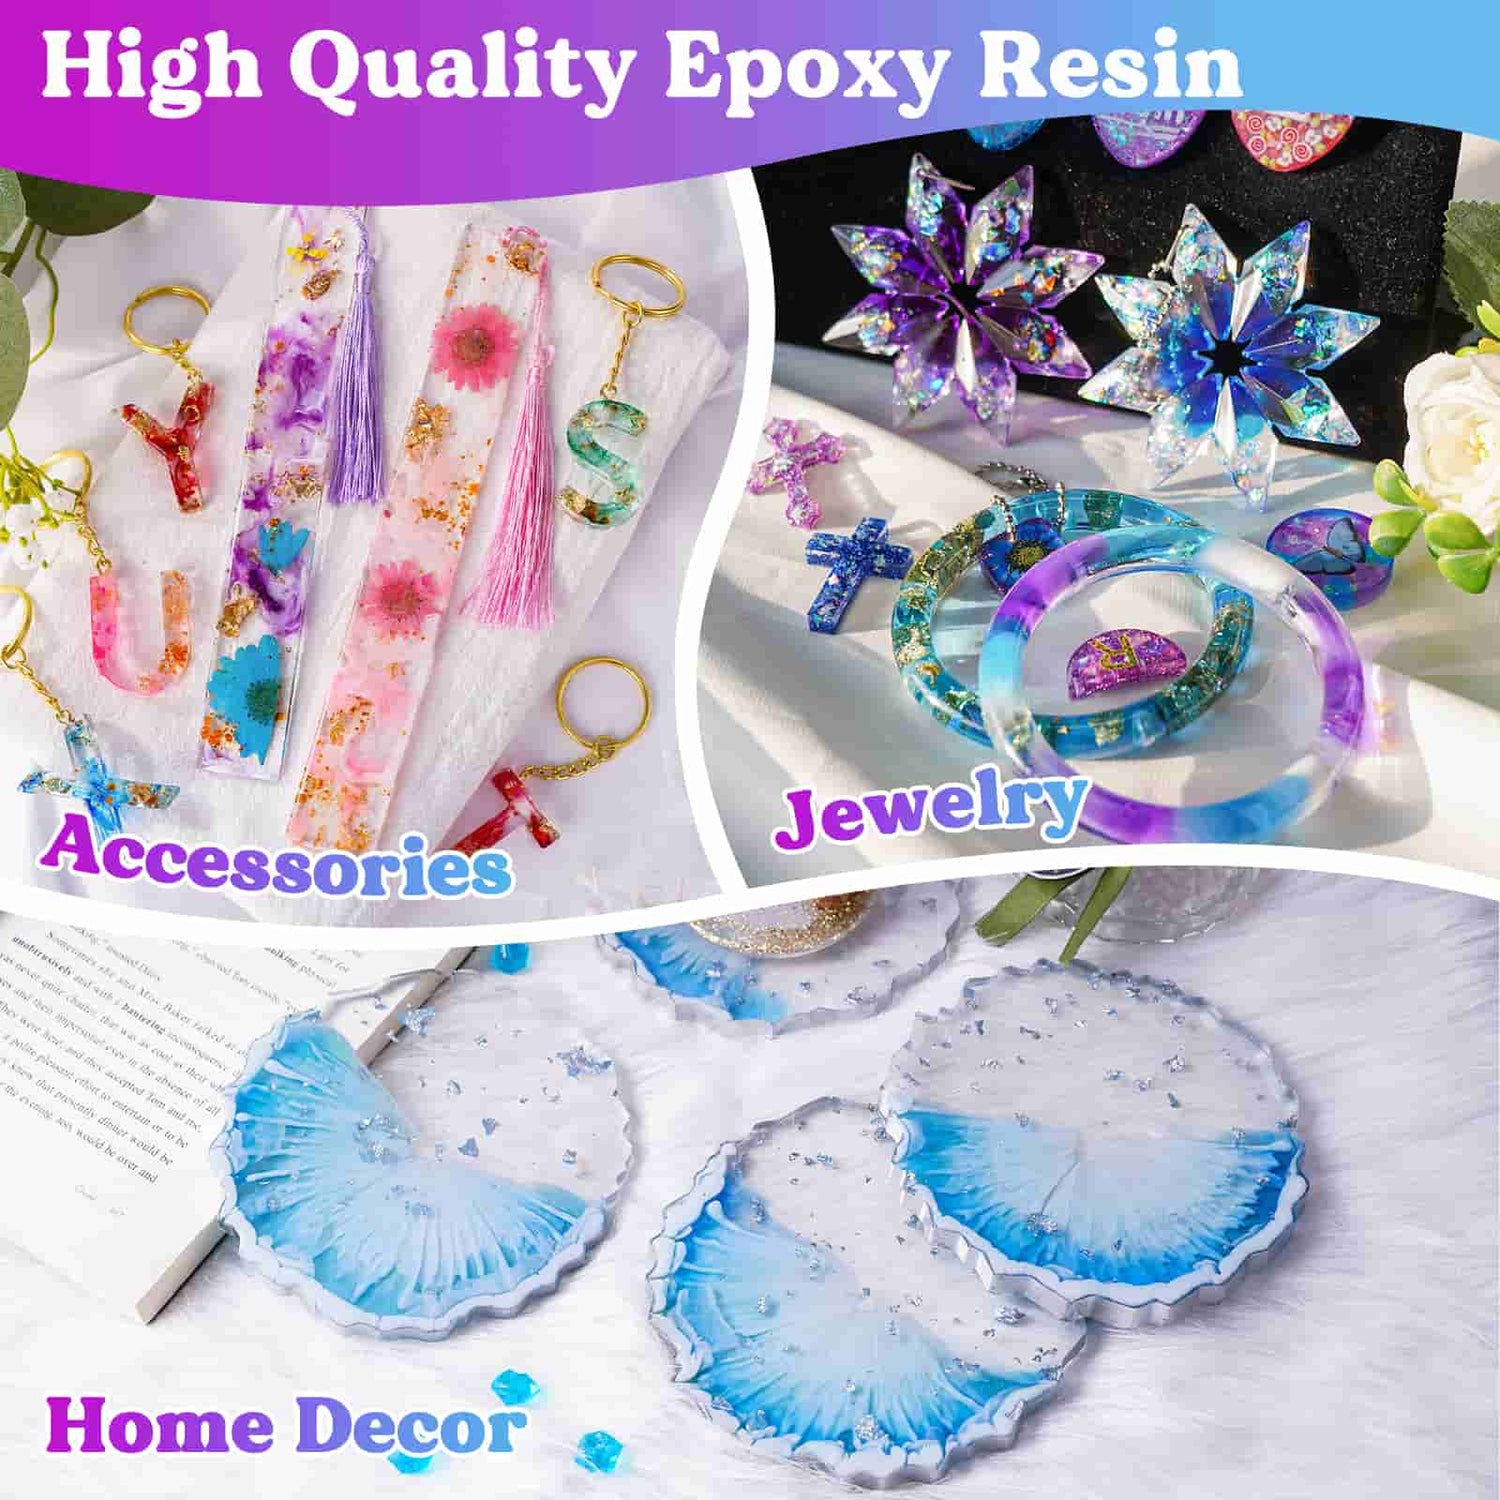  LET'S RESIN 16oz Clear Epoxy Resin,Bubbles Free